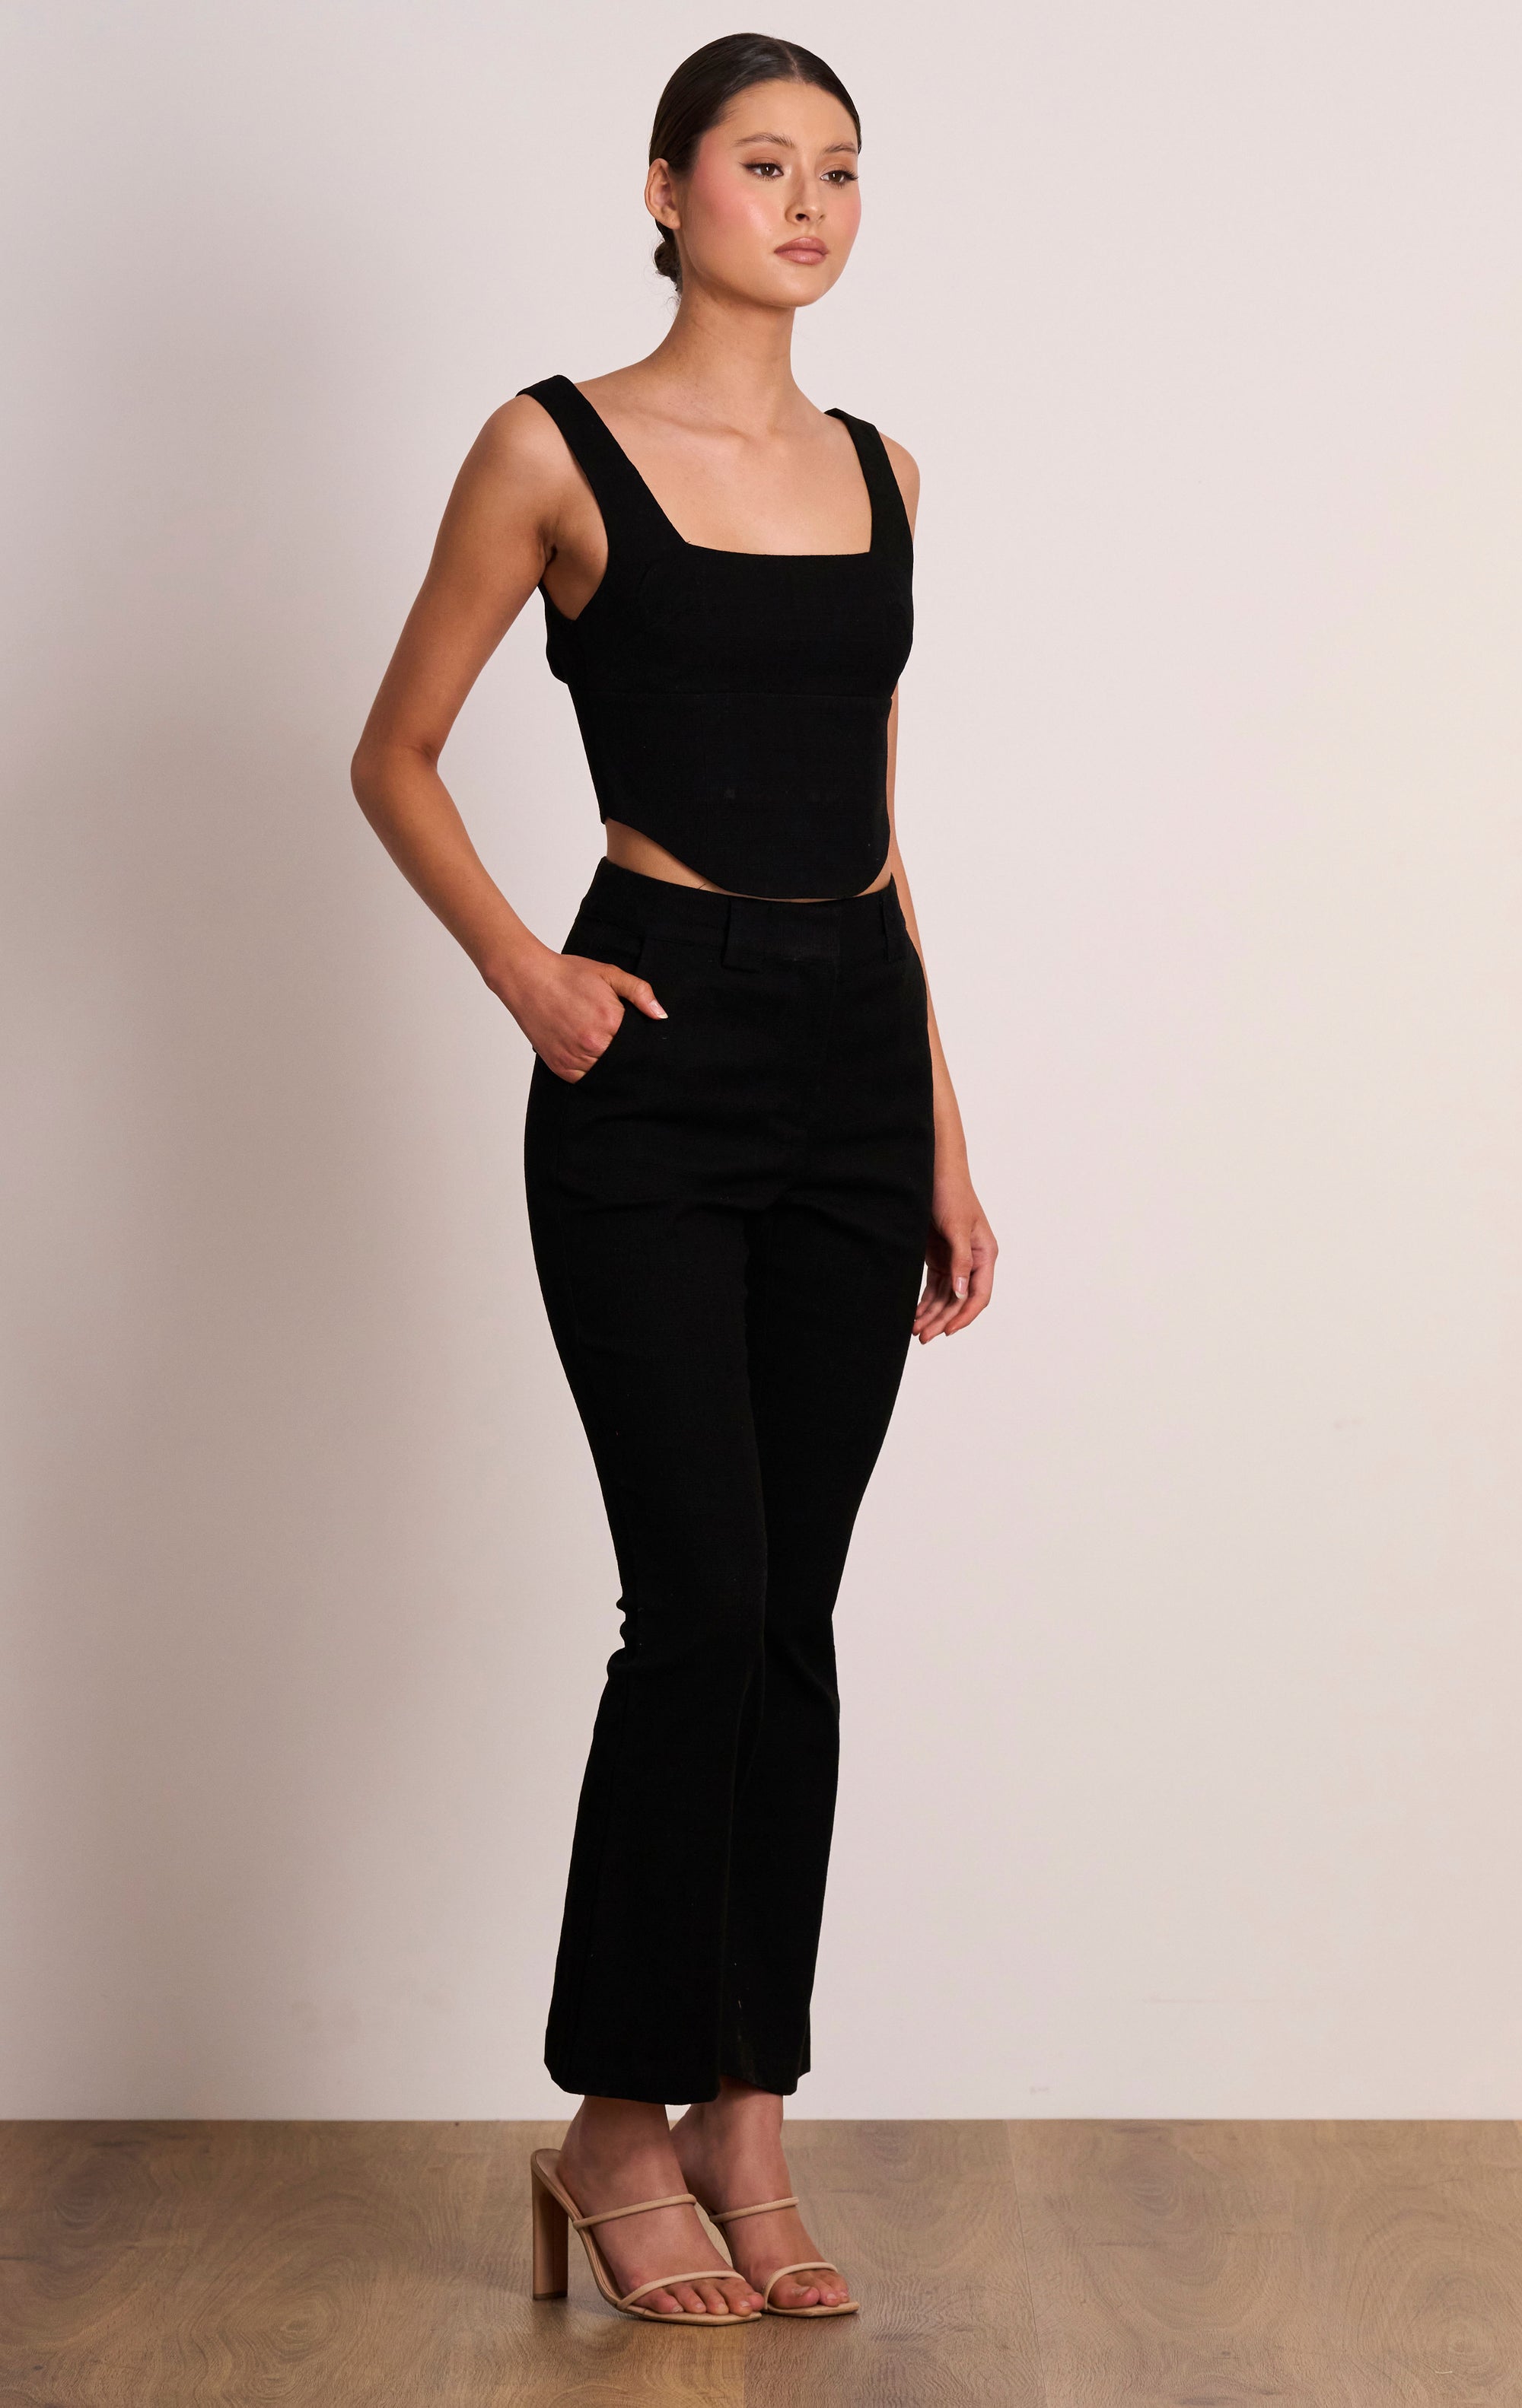 Fever Pant - TAKE 40% OFF DISCOUNT APPLIED AT CHECKOUT